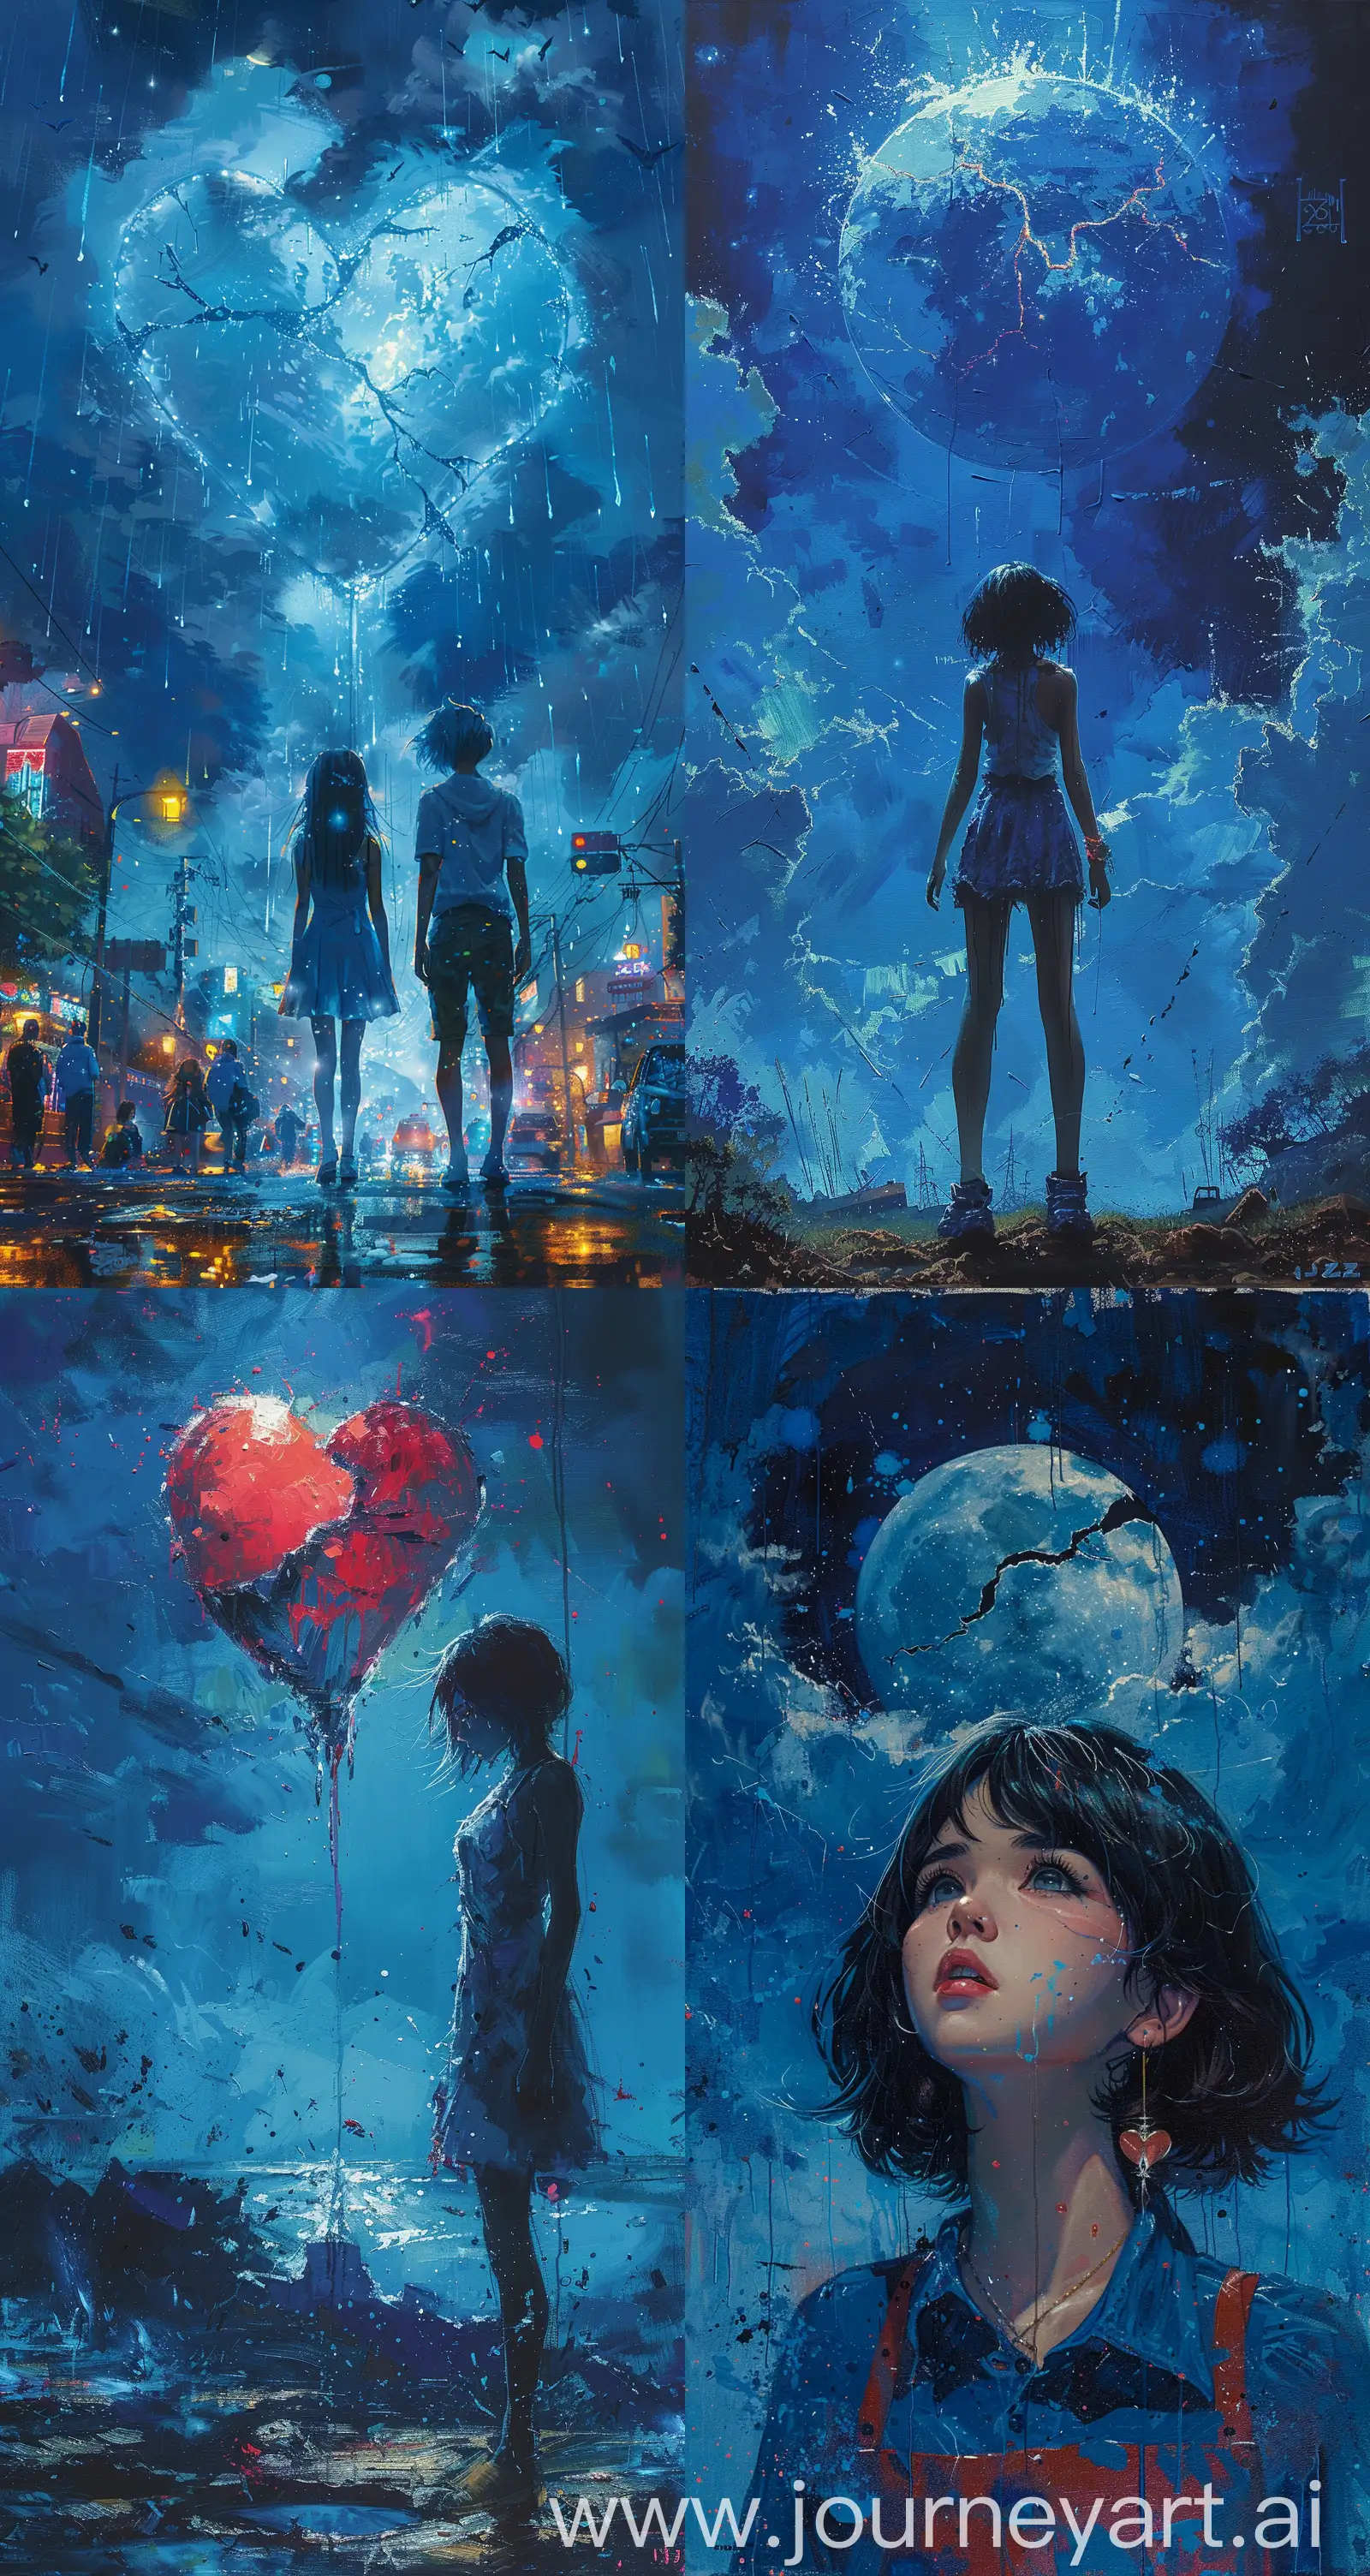 Surreal-90s-Manga-Girl-with-Giant-Broken-Heart-in-Cinematic-Blue-Setting